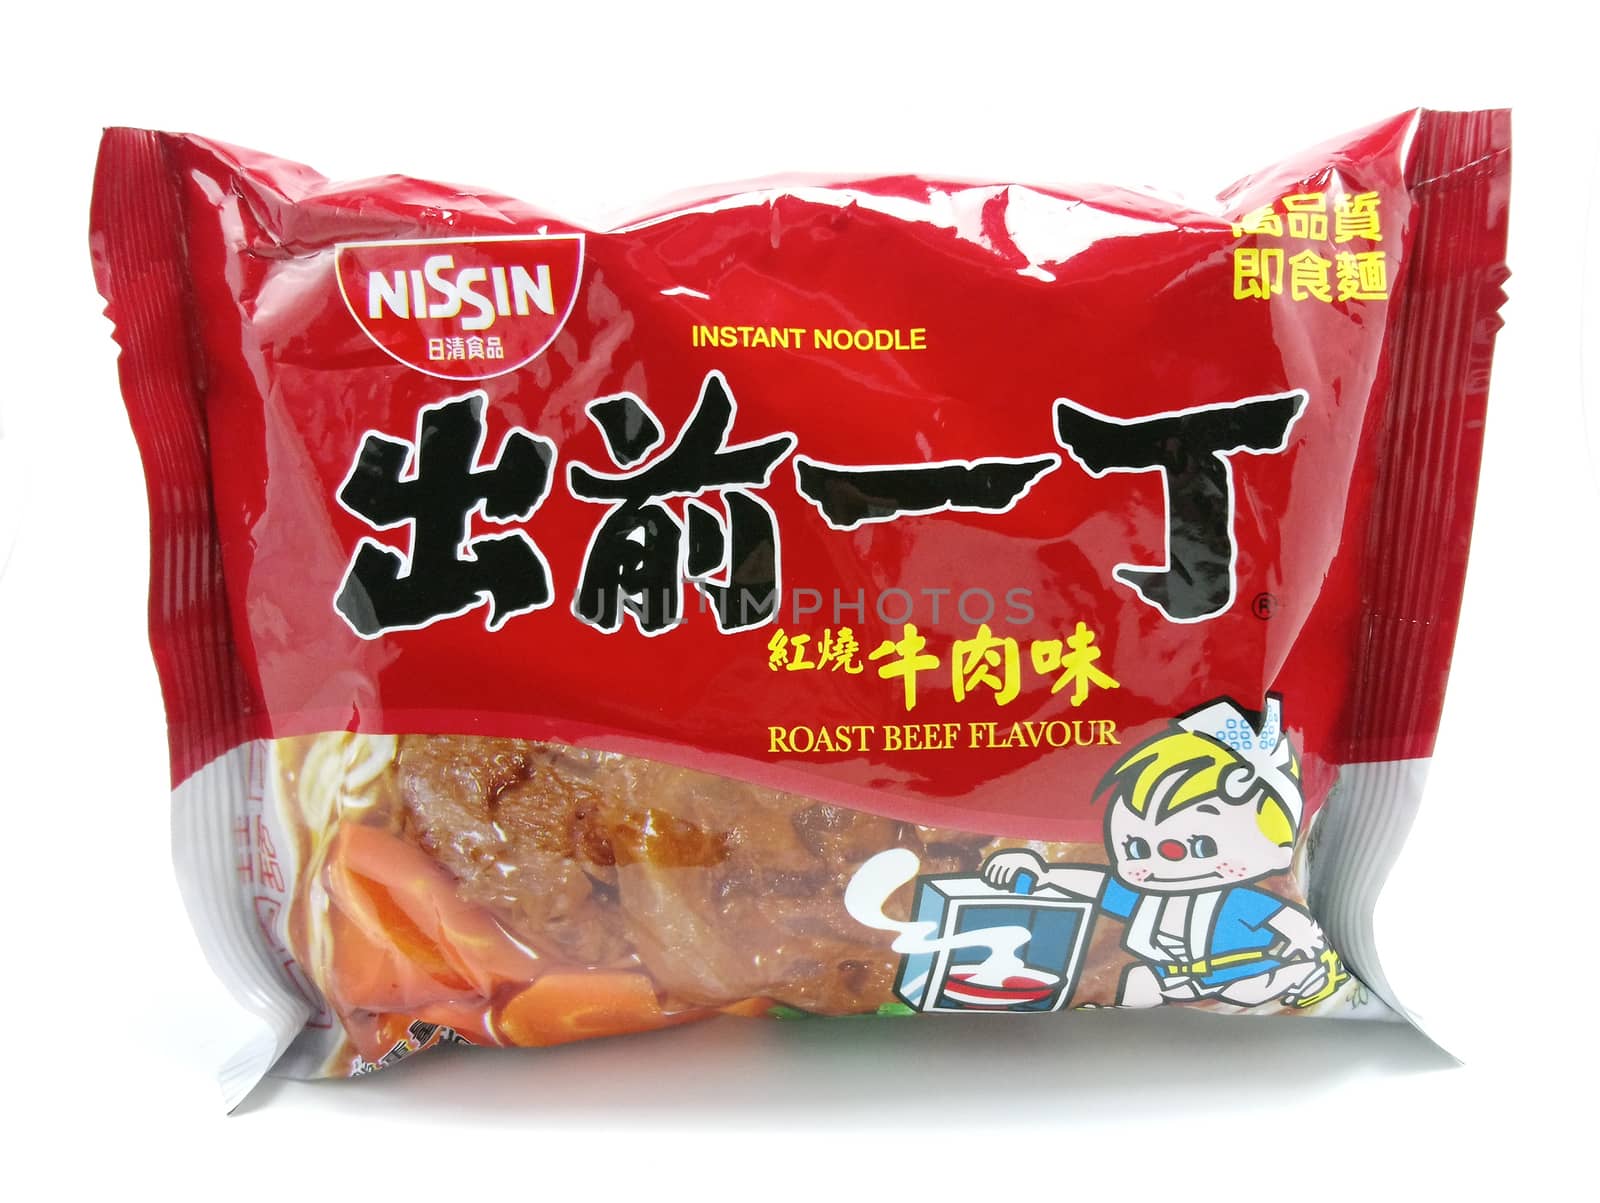 Nissin roast beef flavor noodles in Manila, Philippines by imwaltersy